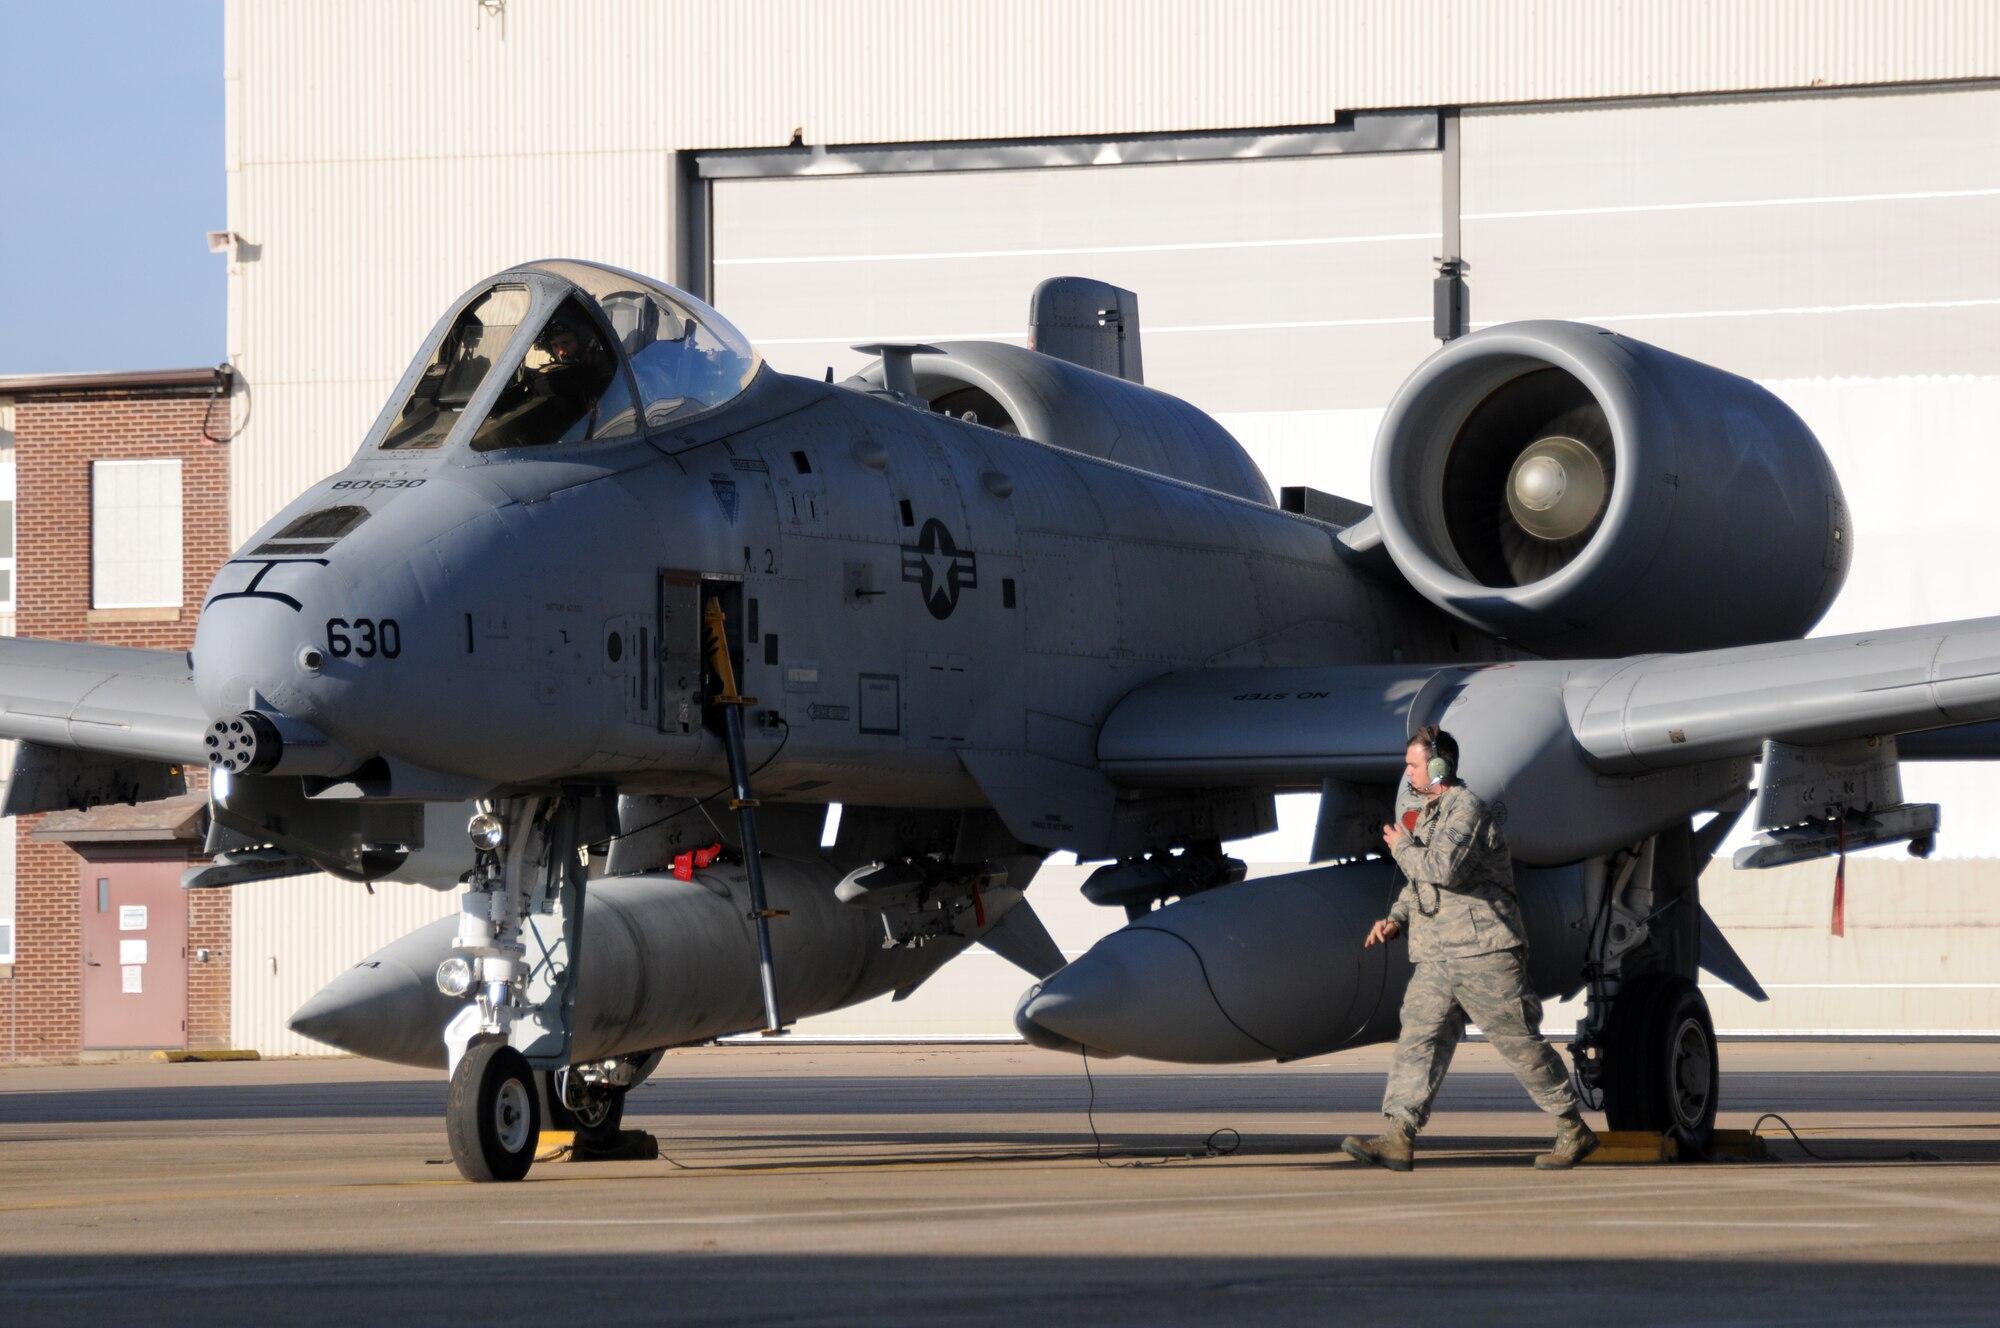 Tech. Sgt. Eric Jones, a crew chief with the 188th Aircraft Maintenance Squadron, communicates with Capt. Michael McVay of the 74th Fighter Squadron, Moody Air Force Base, Ga. McVay is delivering one of two A-10C Thunderbolt IIs from the 188th Fighter Wing's Ebbing Air National Guard Base to Moody AFB as part of the wing’s on-going conversion from a fighter mission to remotely piloted aircraft and Intelligence mission, which will include a space-focused targeting squadron. (U.S. Air National Guard photo by Tech Sgt. Josh Lewis/188th Fighter Wing Public Affairs)